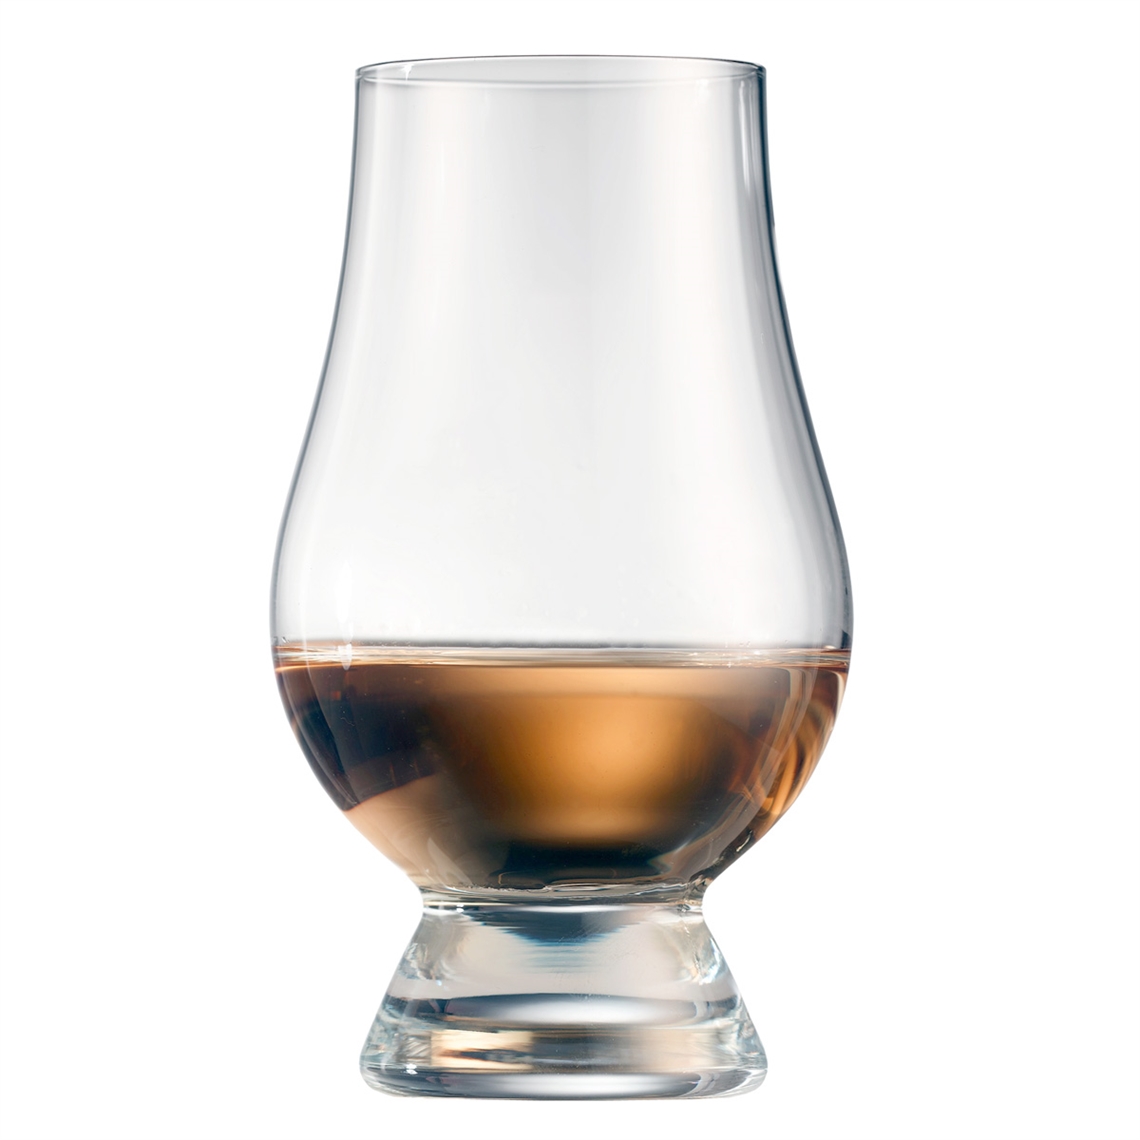 View more riedel vinum from our Whisky Glasses range